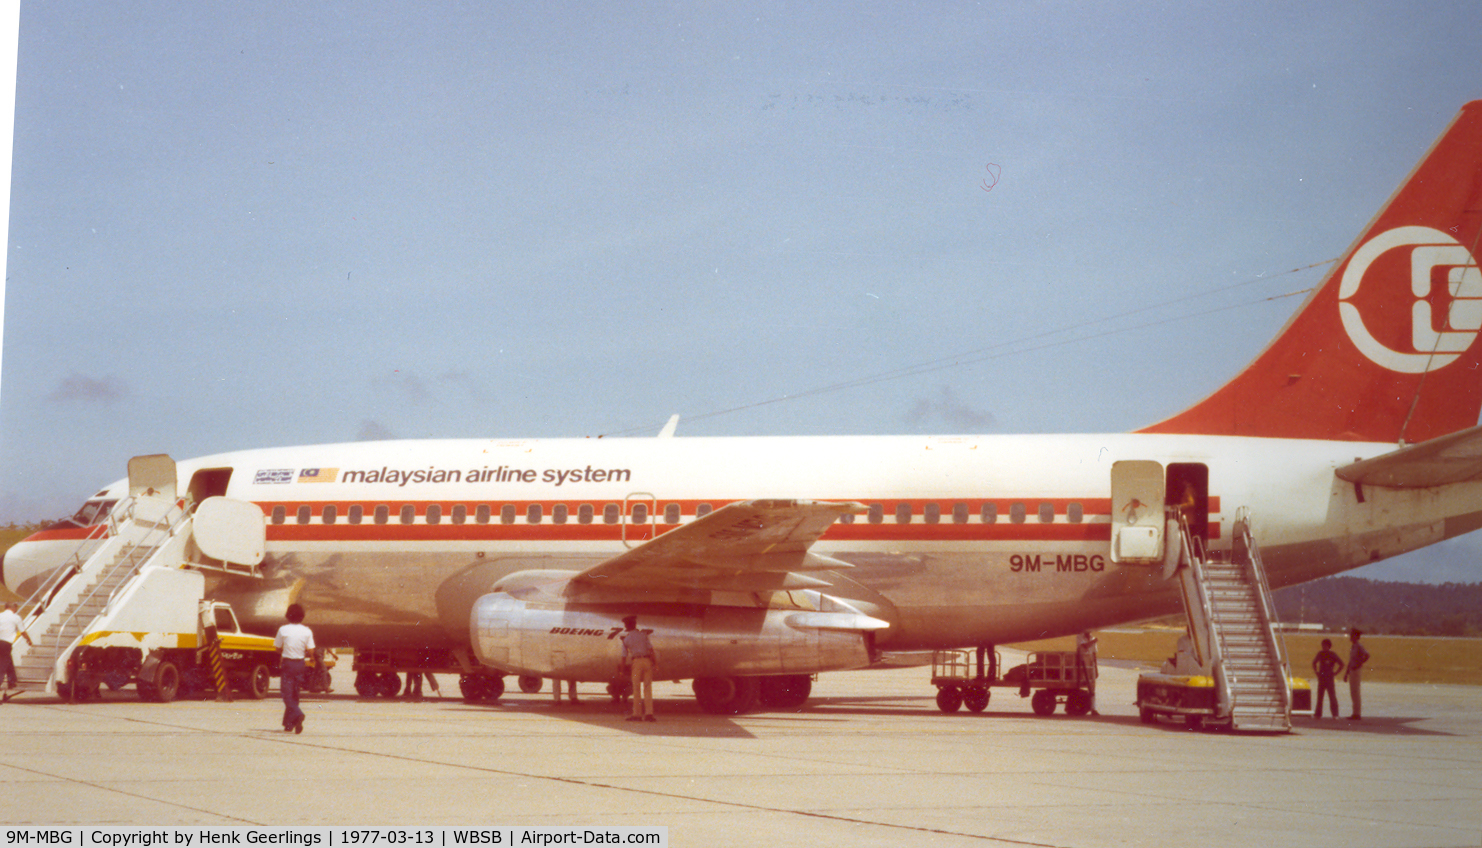 9M-MBG, 1972 Boeing 737-2H6 C/N 20631, Malaysian Airlines